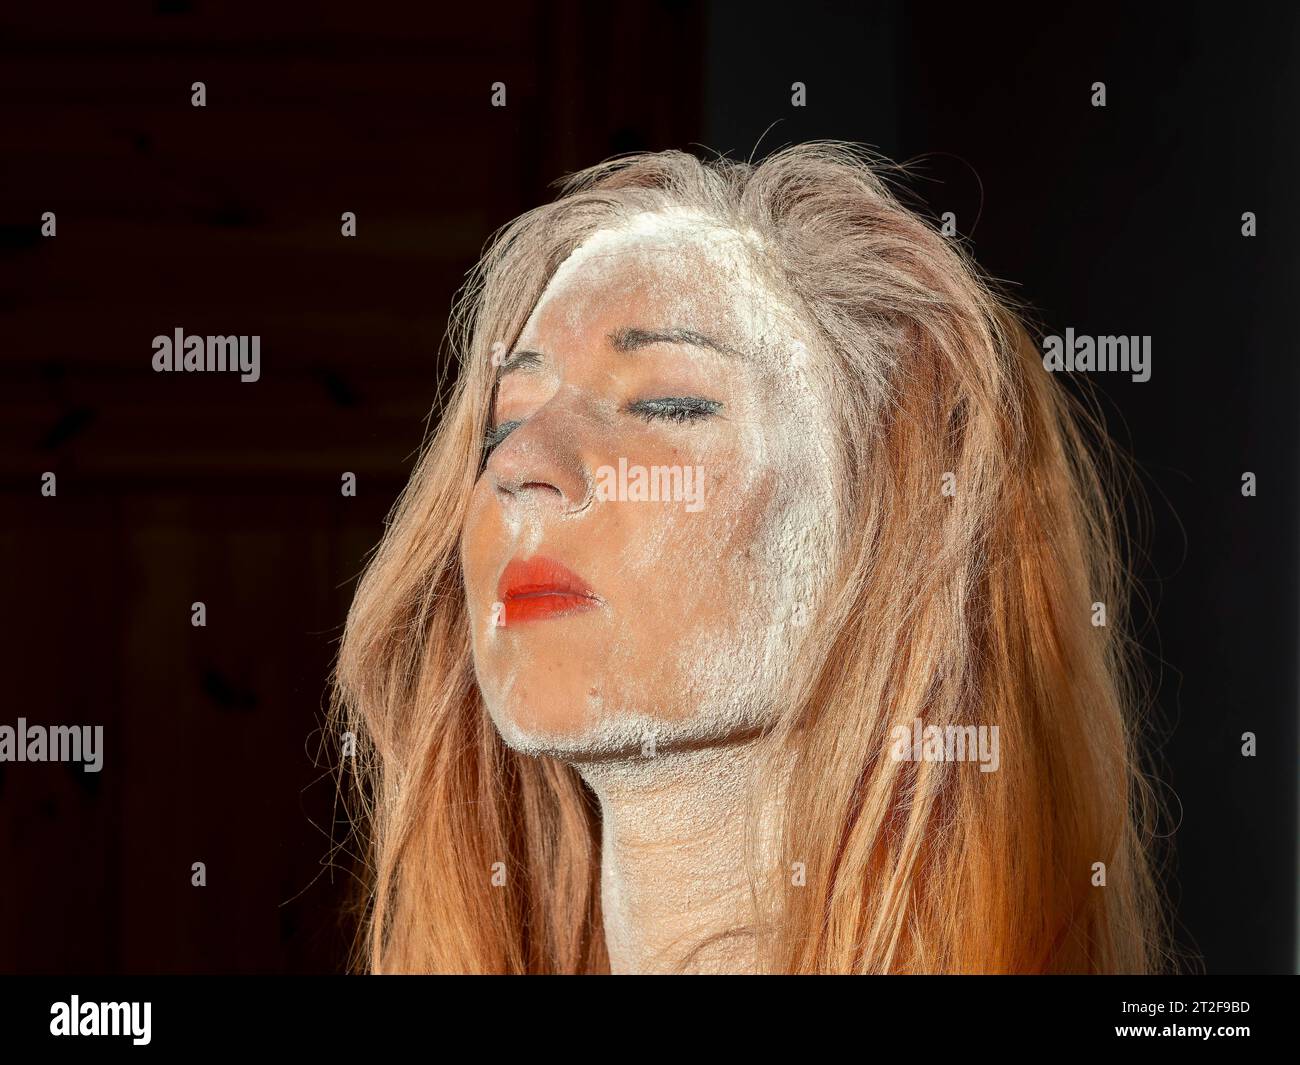 Woman with red lips, long hair, dusty face, drama, despair, suffering and war Stock Photo